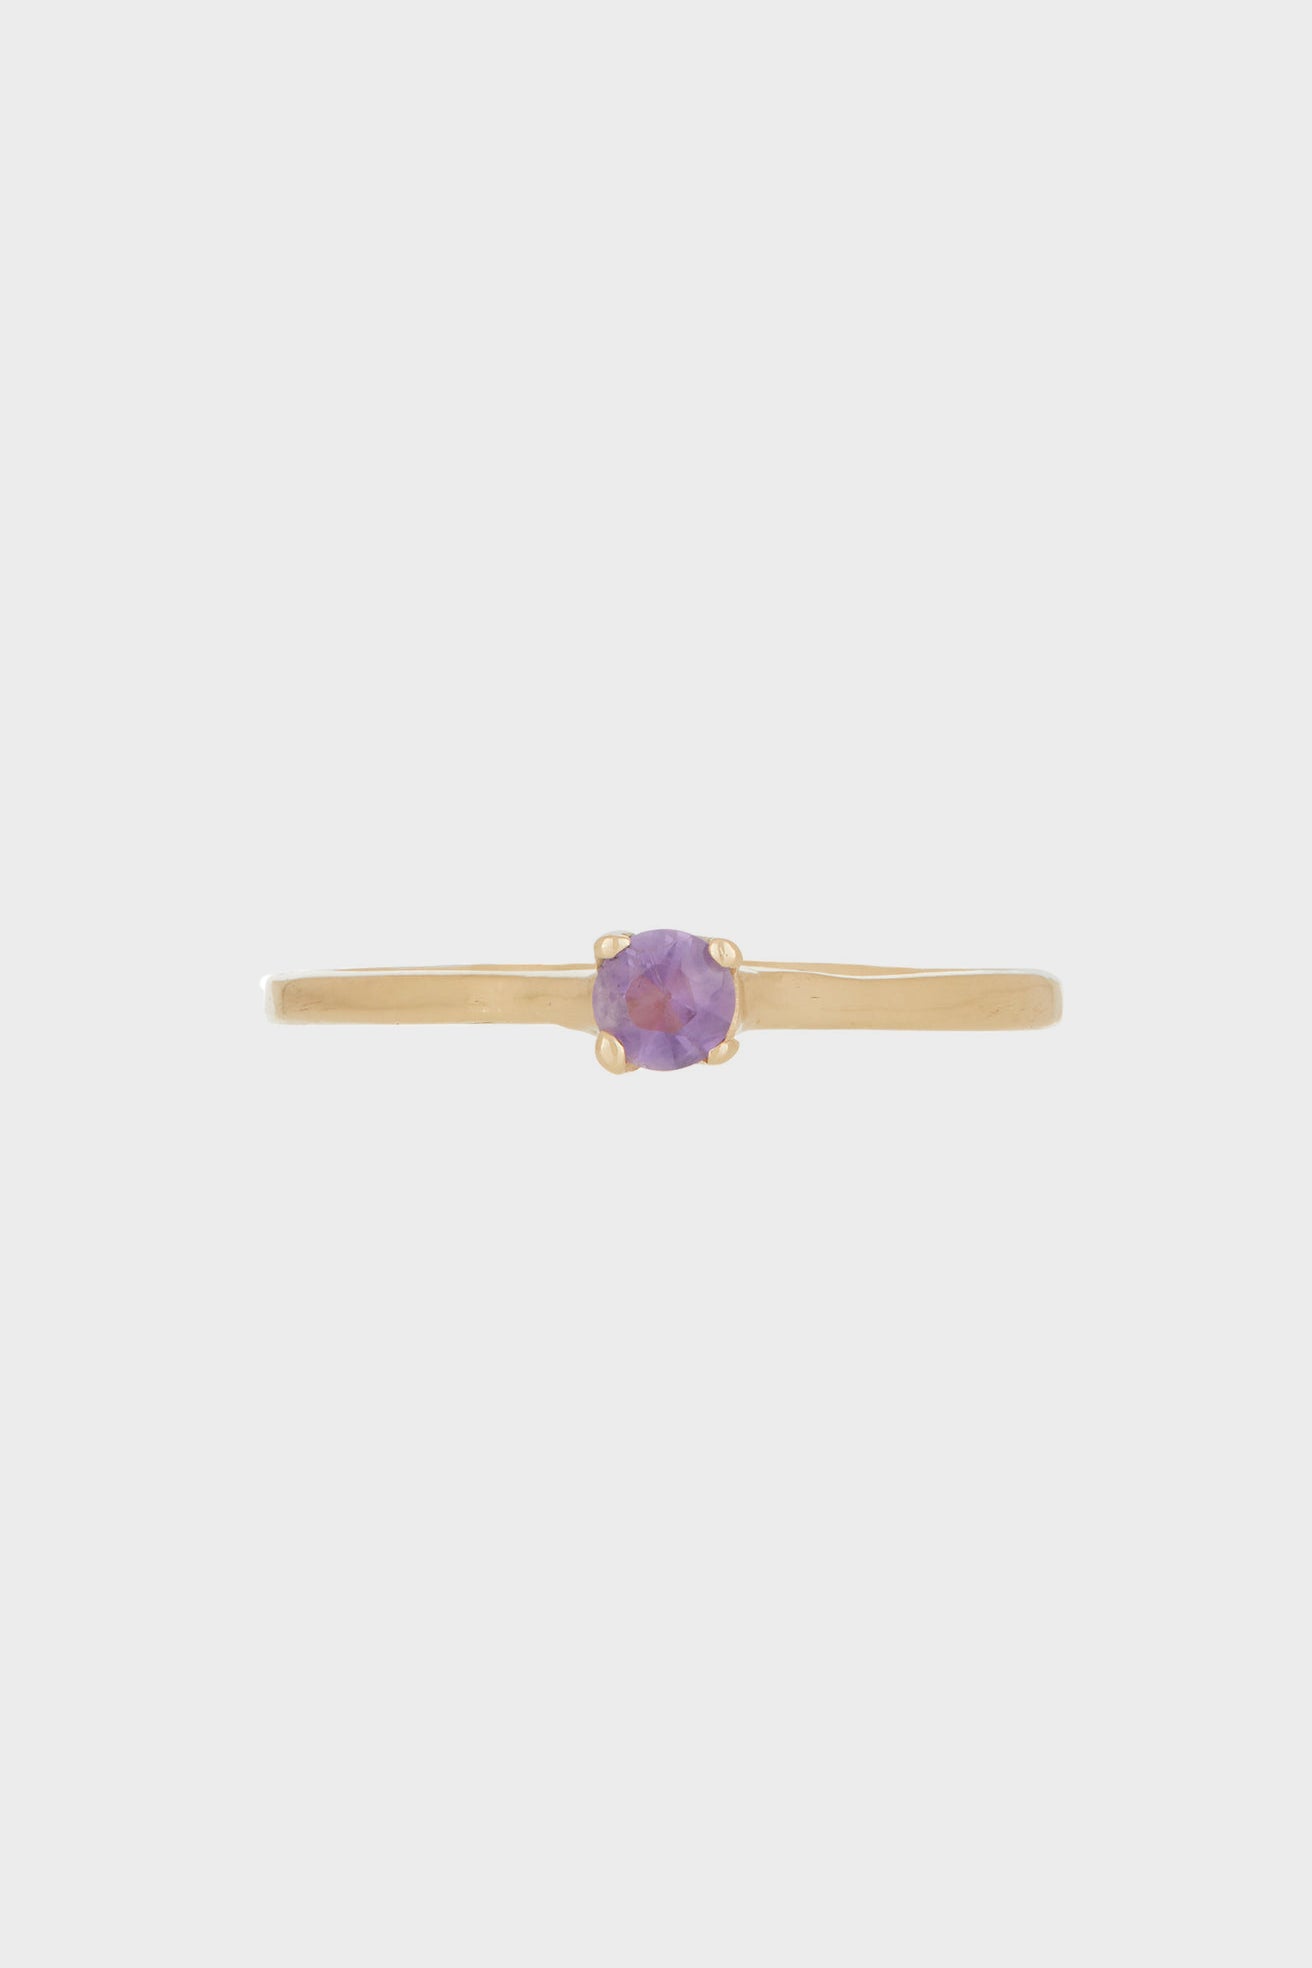 Palace Ring in Amethyst & 14k Yellow Gold